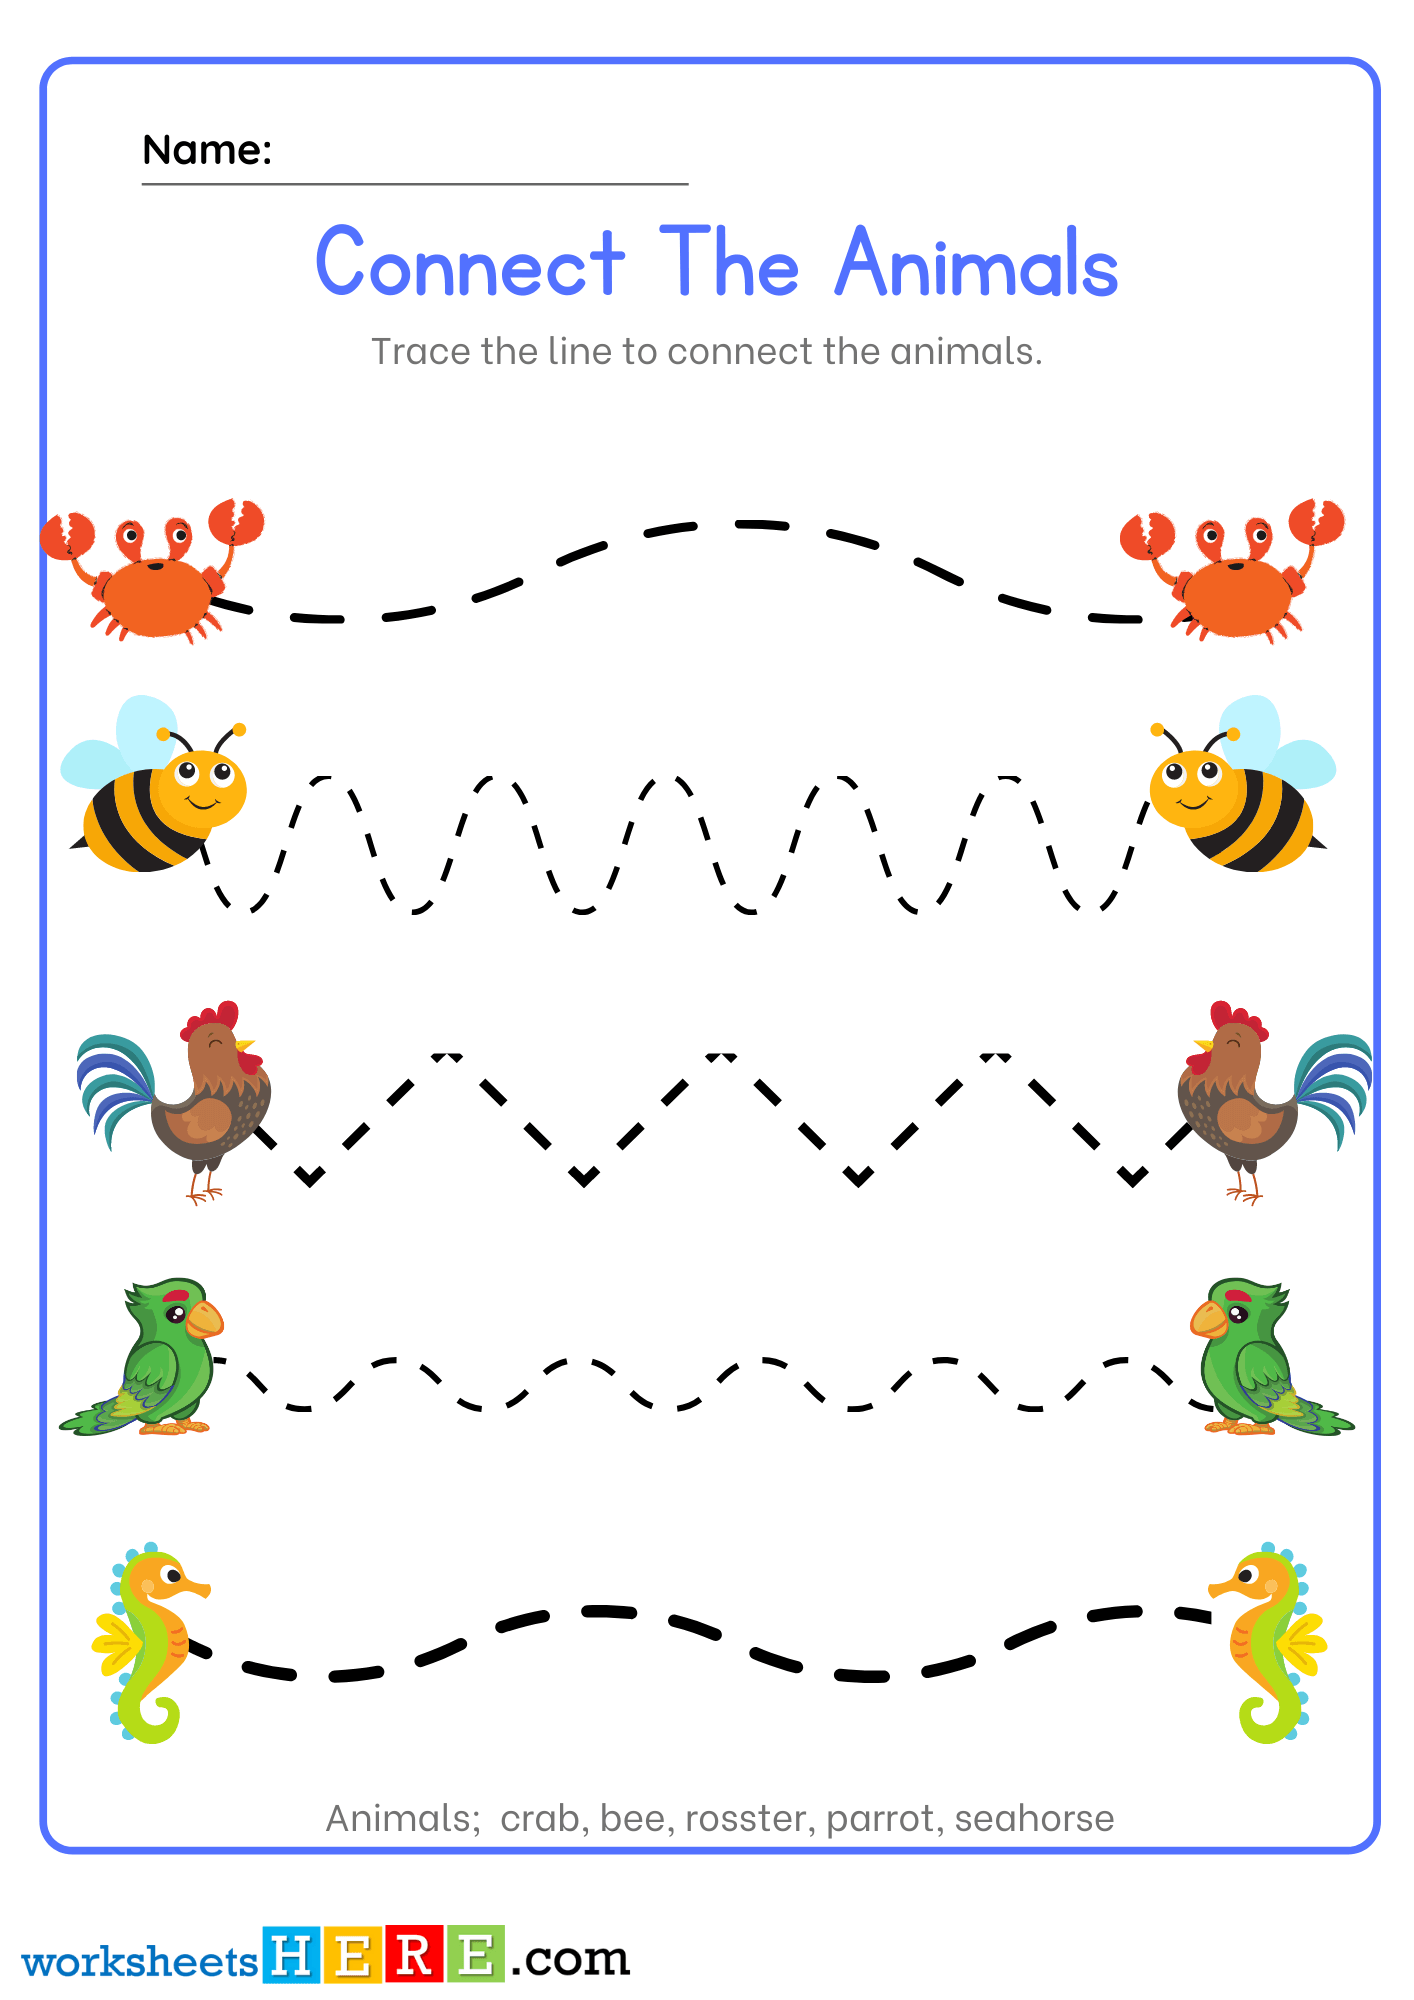 Connect The Animals, Tracing Lines Activity PDF Worksheets For Kindergarten